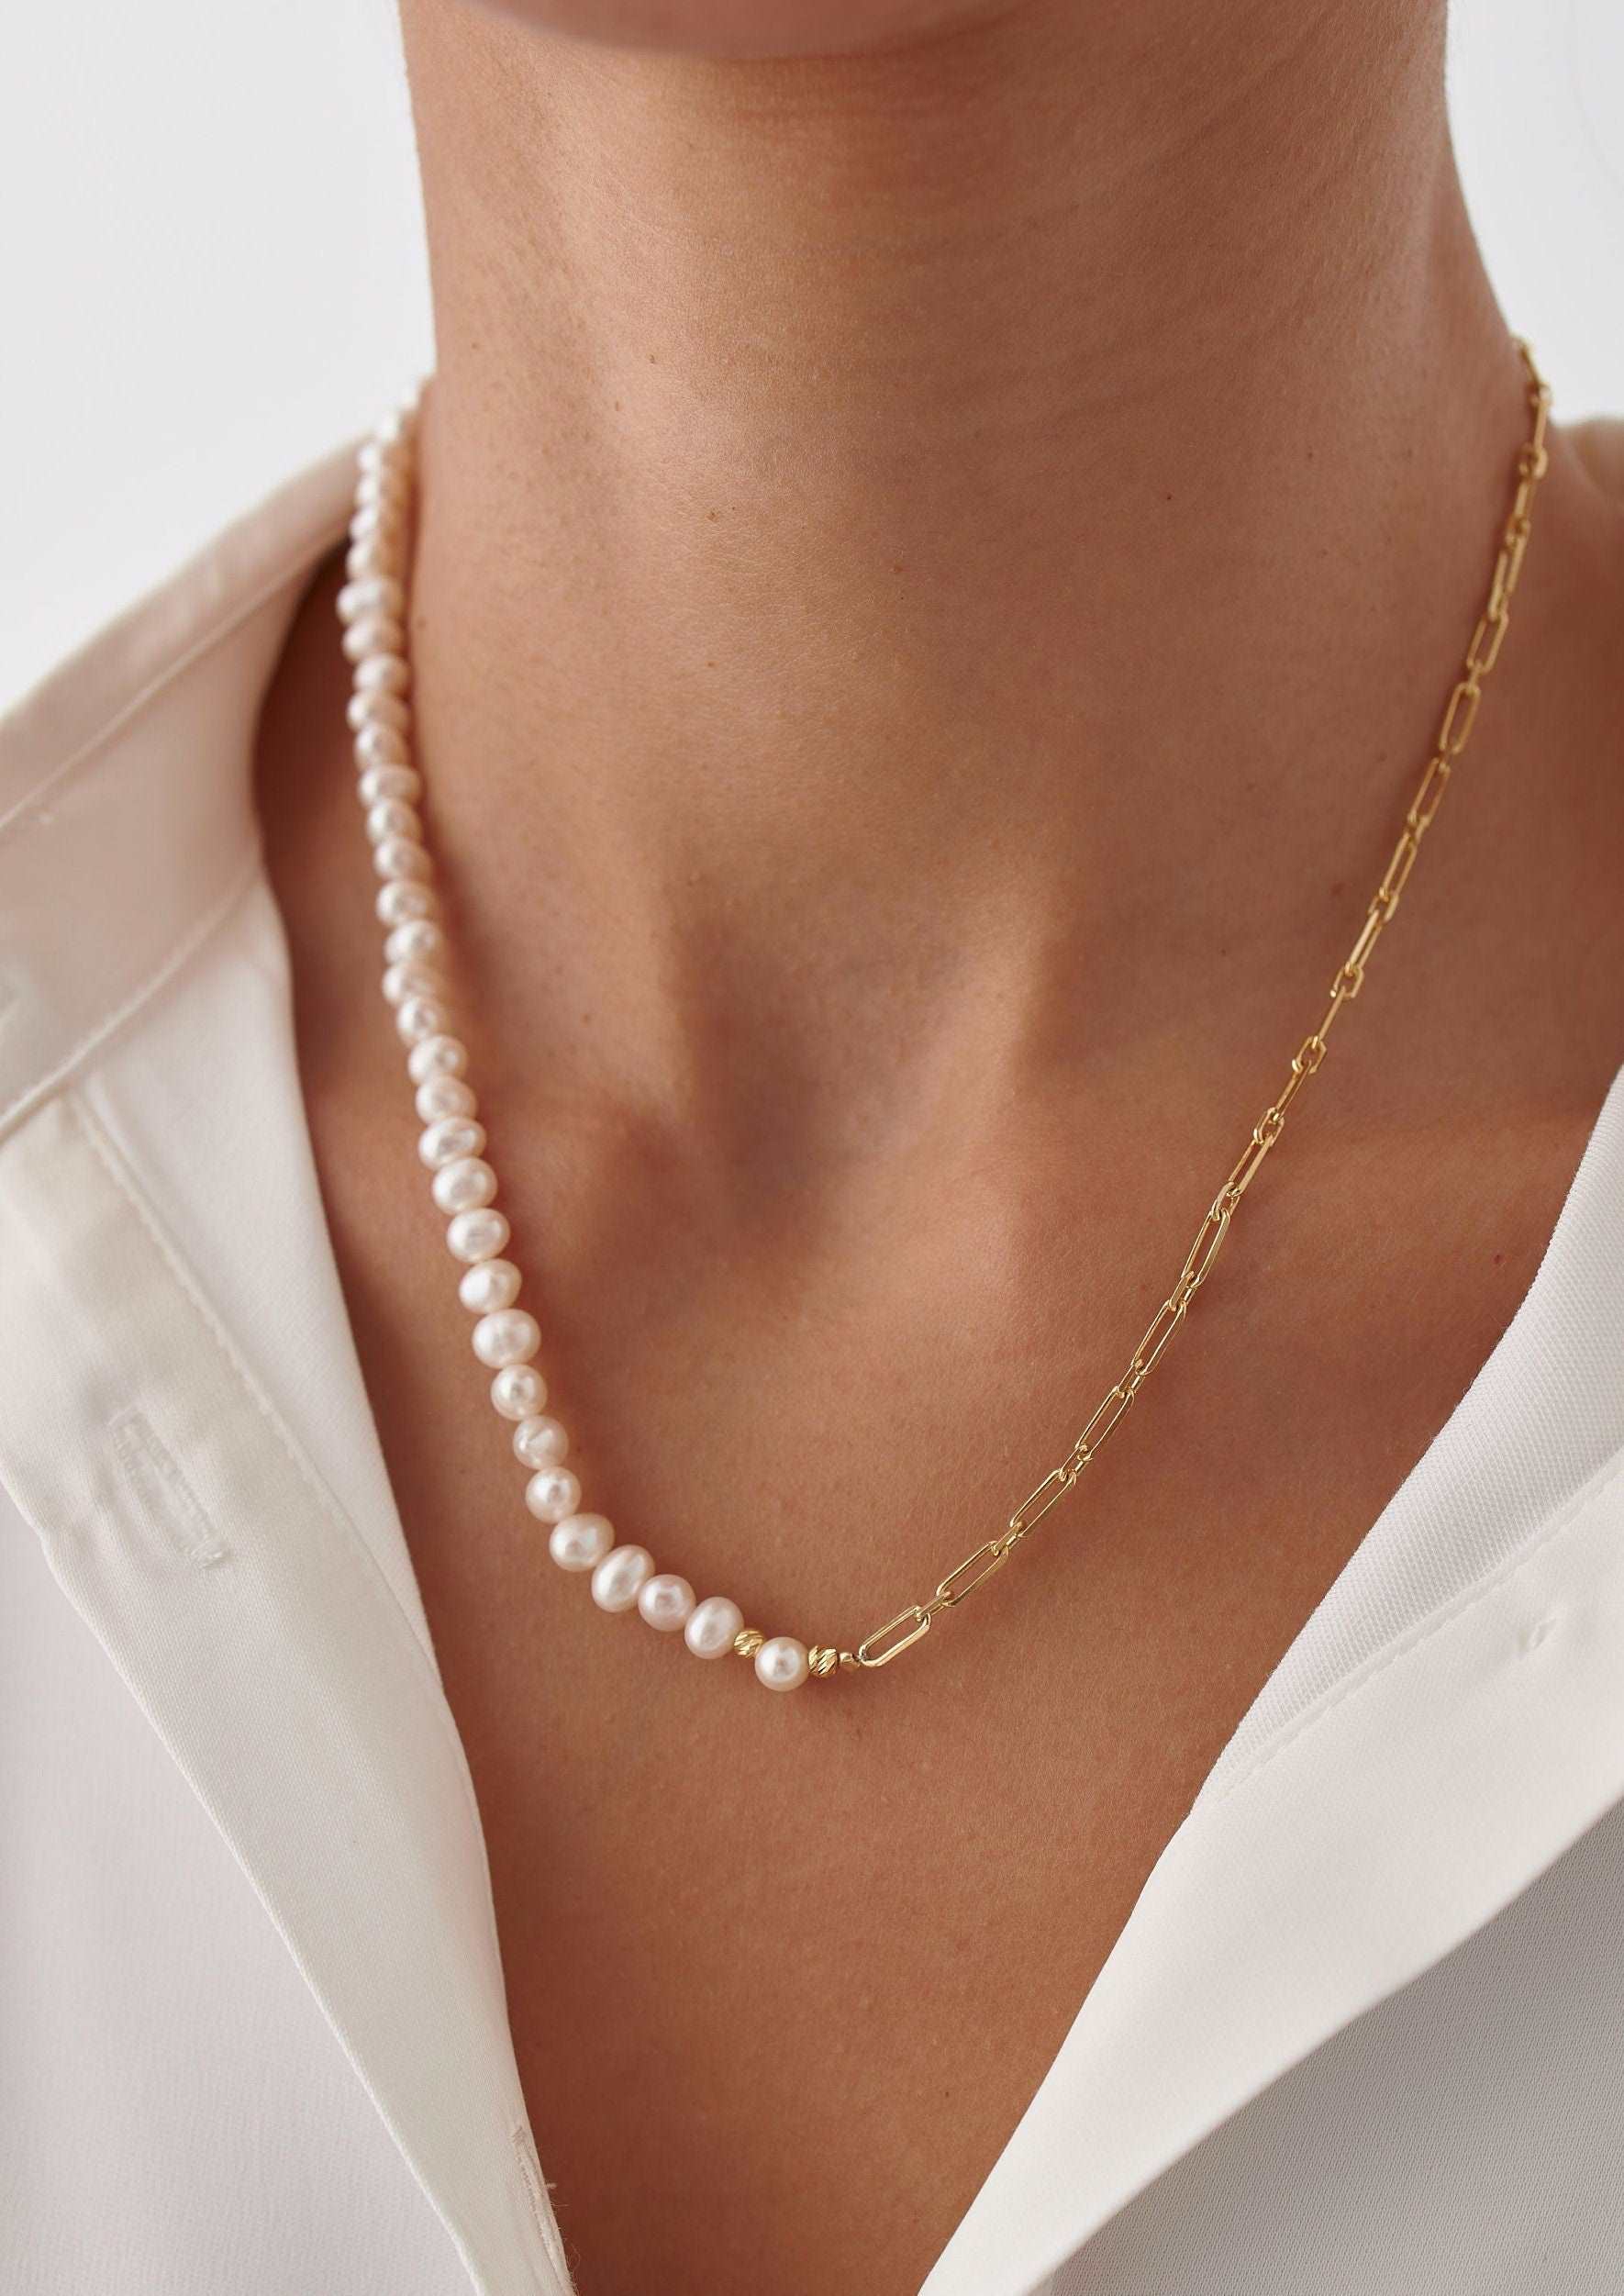 18k Gold Asymmetric Freshwater Pearl Chain Necklace